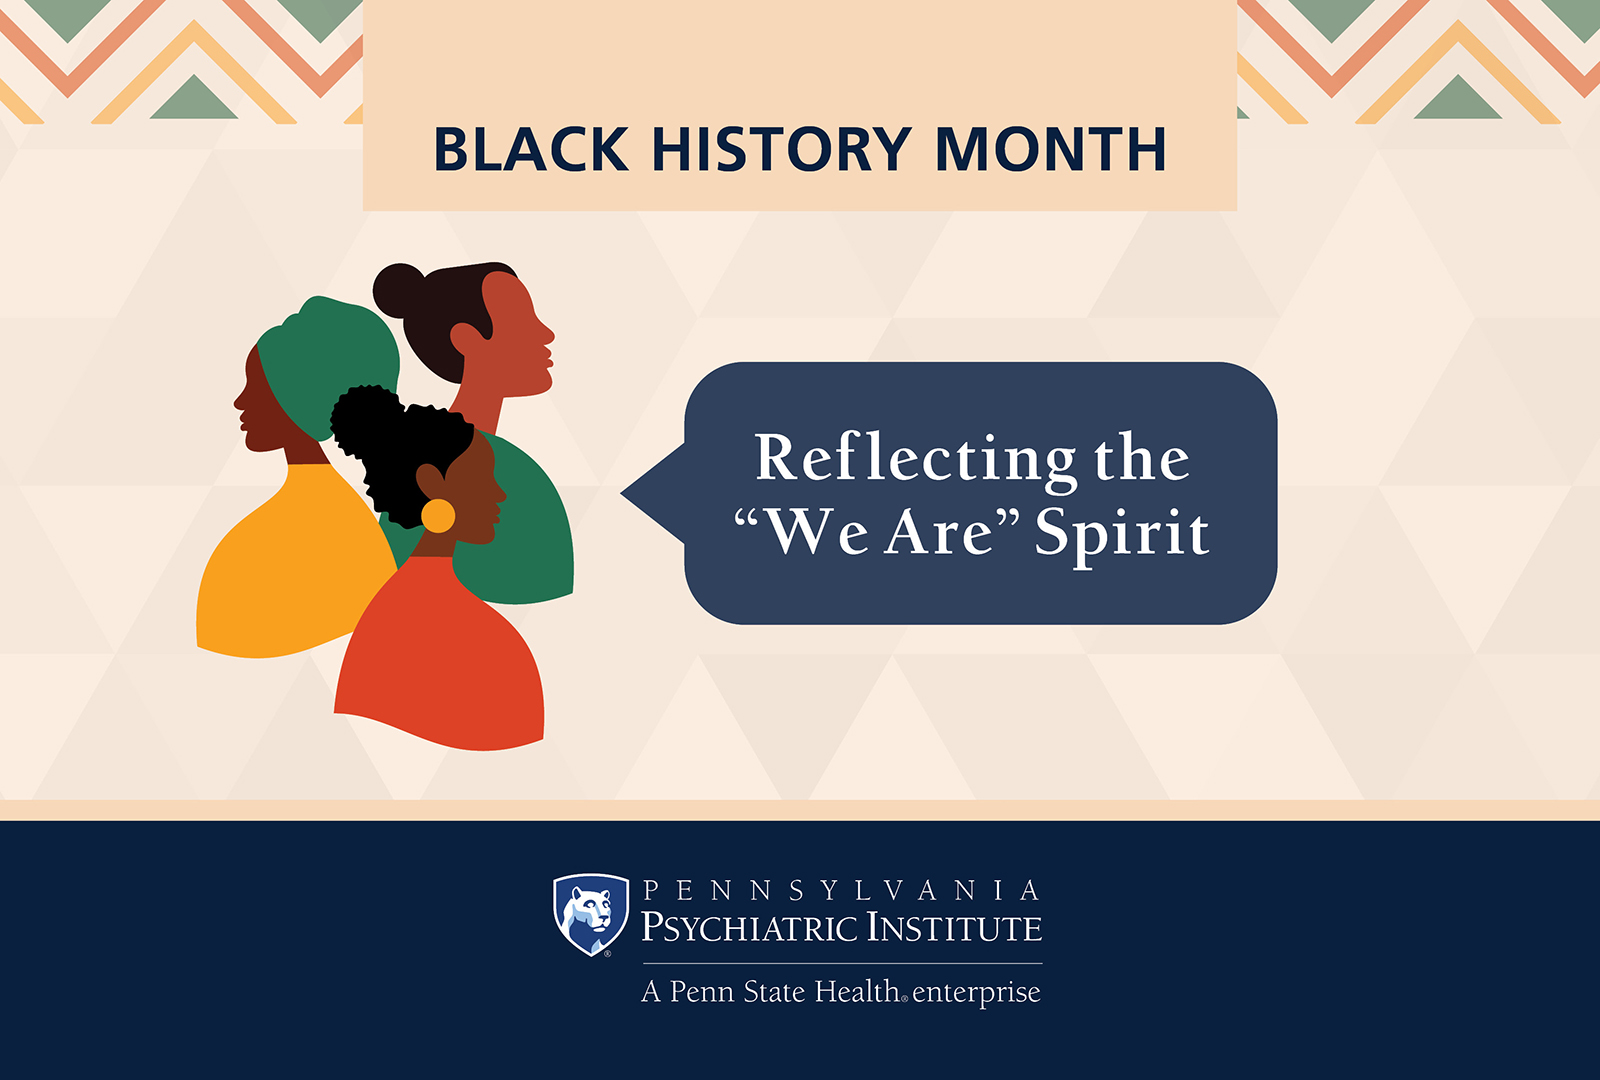 Black History Month: Reflecting the "We Are" Spirit